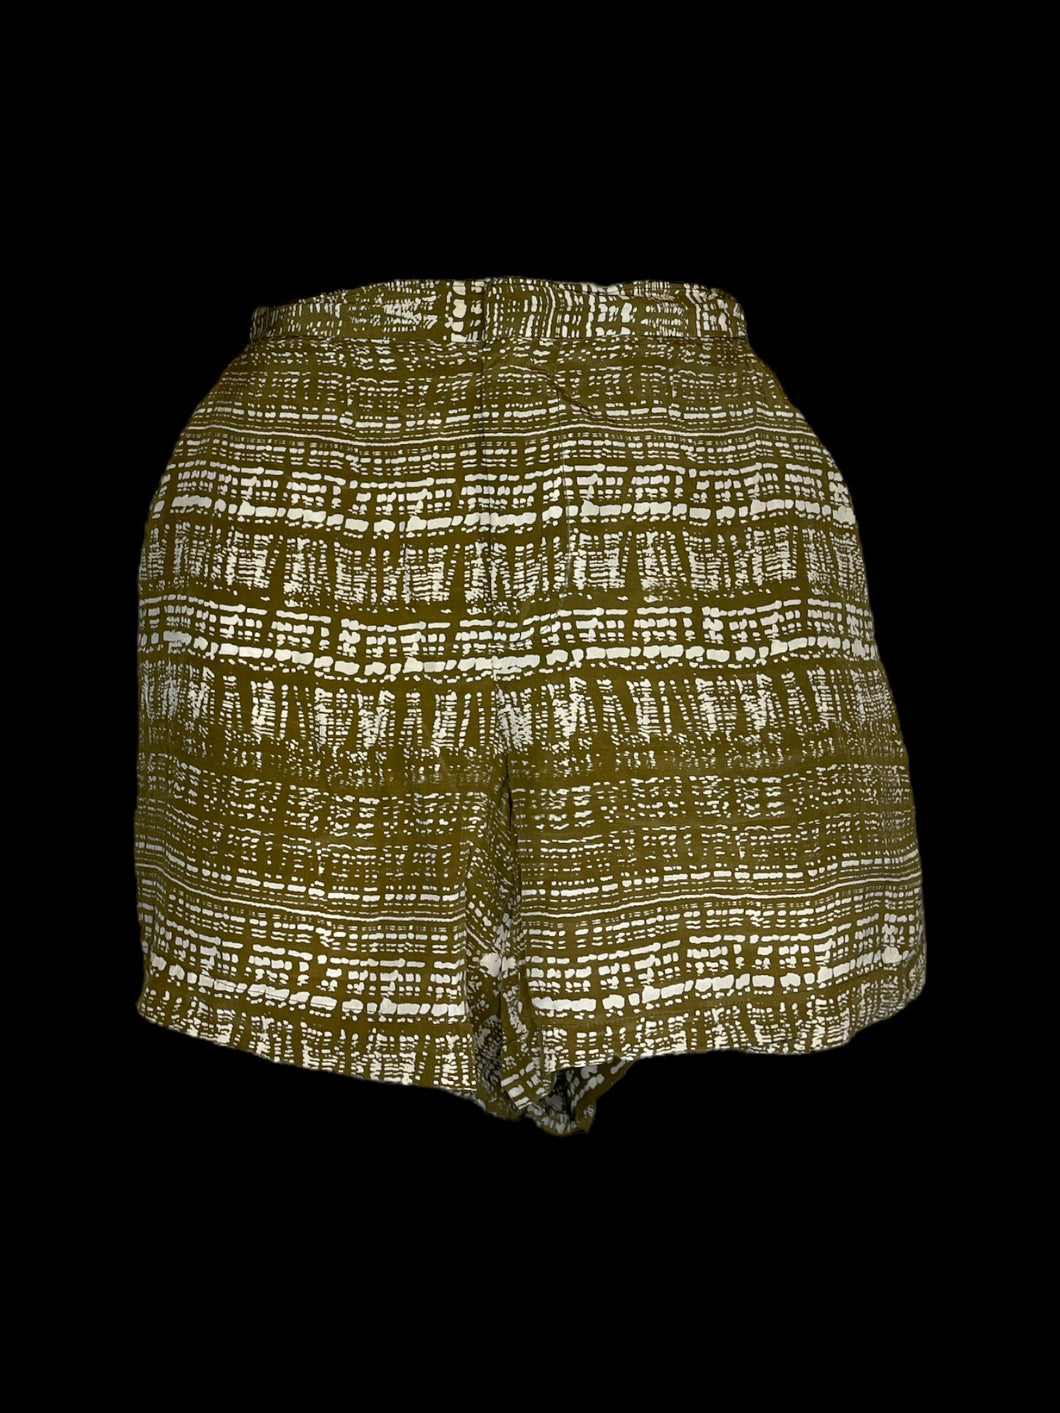 M Olive green & off-white abstract pattern shorts w/ pockets, elastic waist, & button/clasp/zipper closure